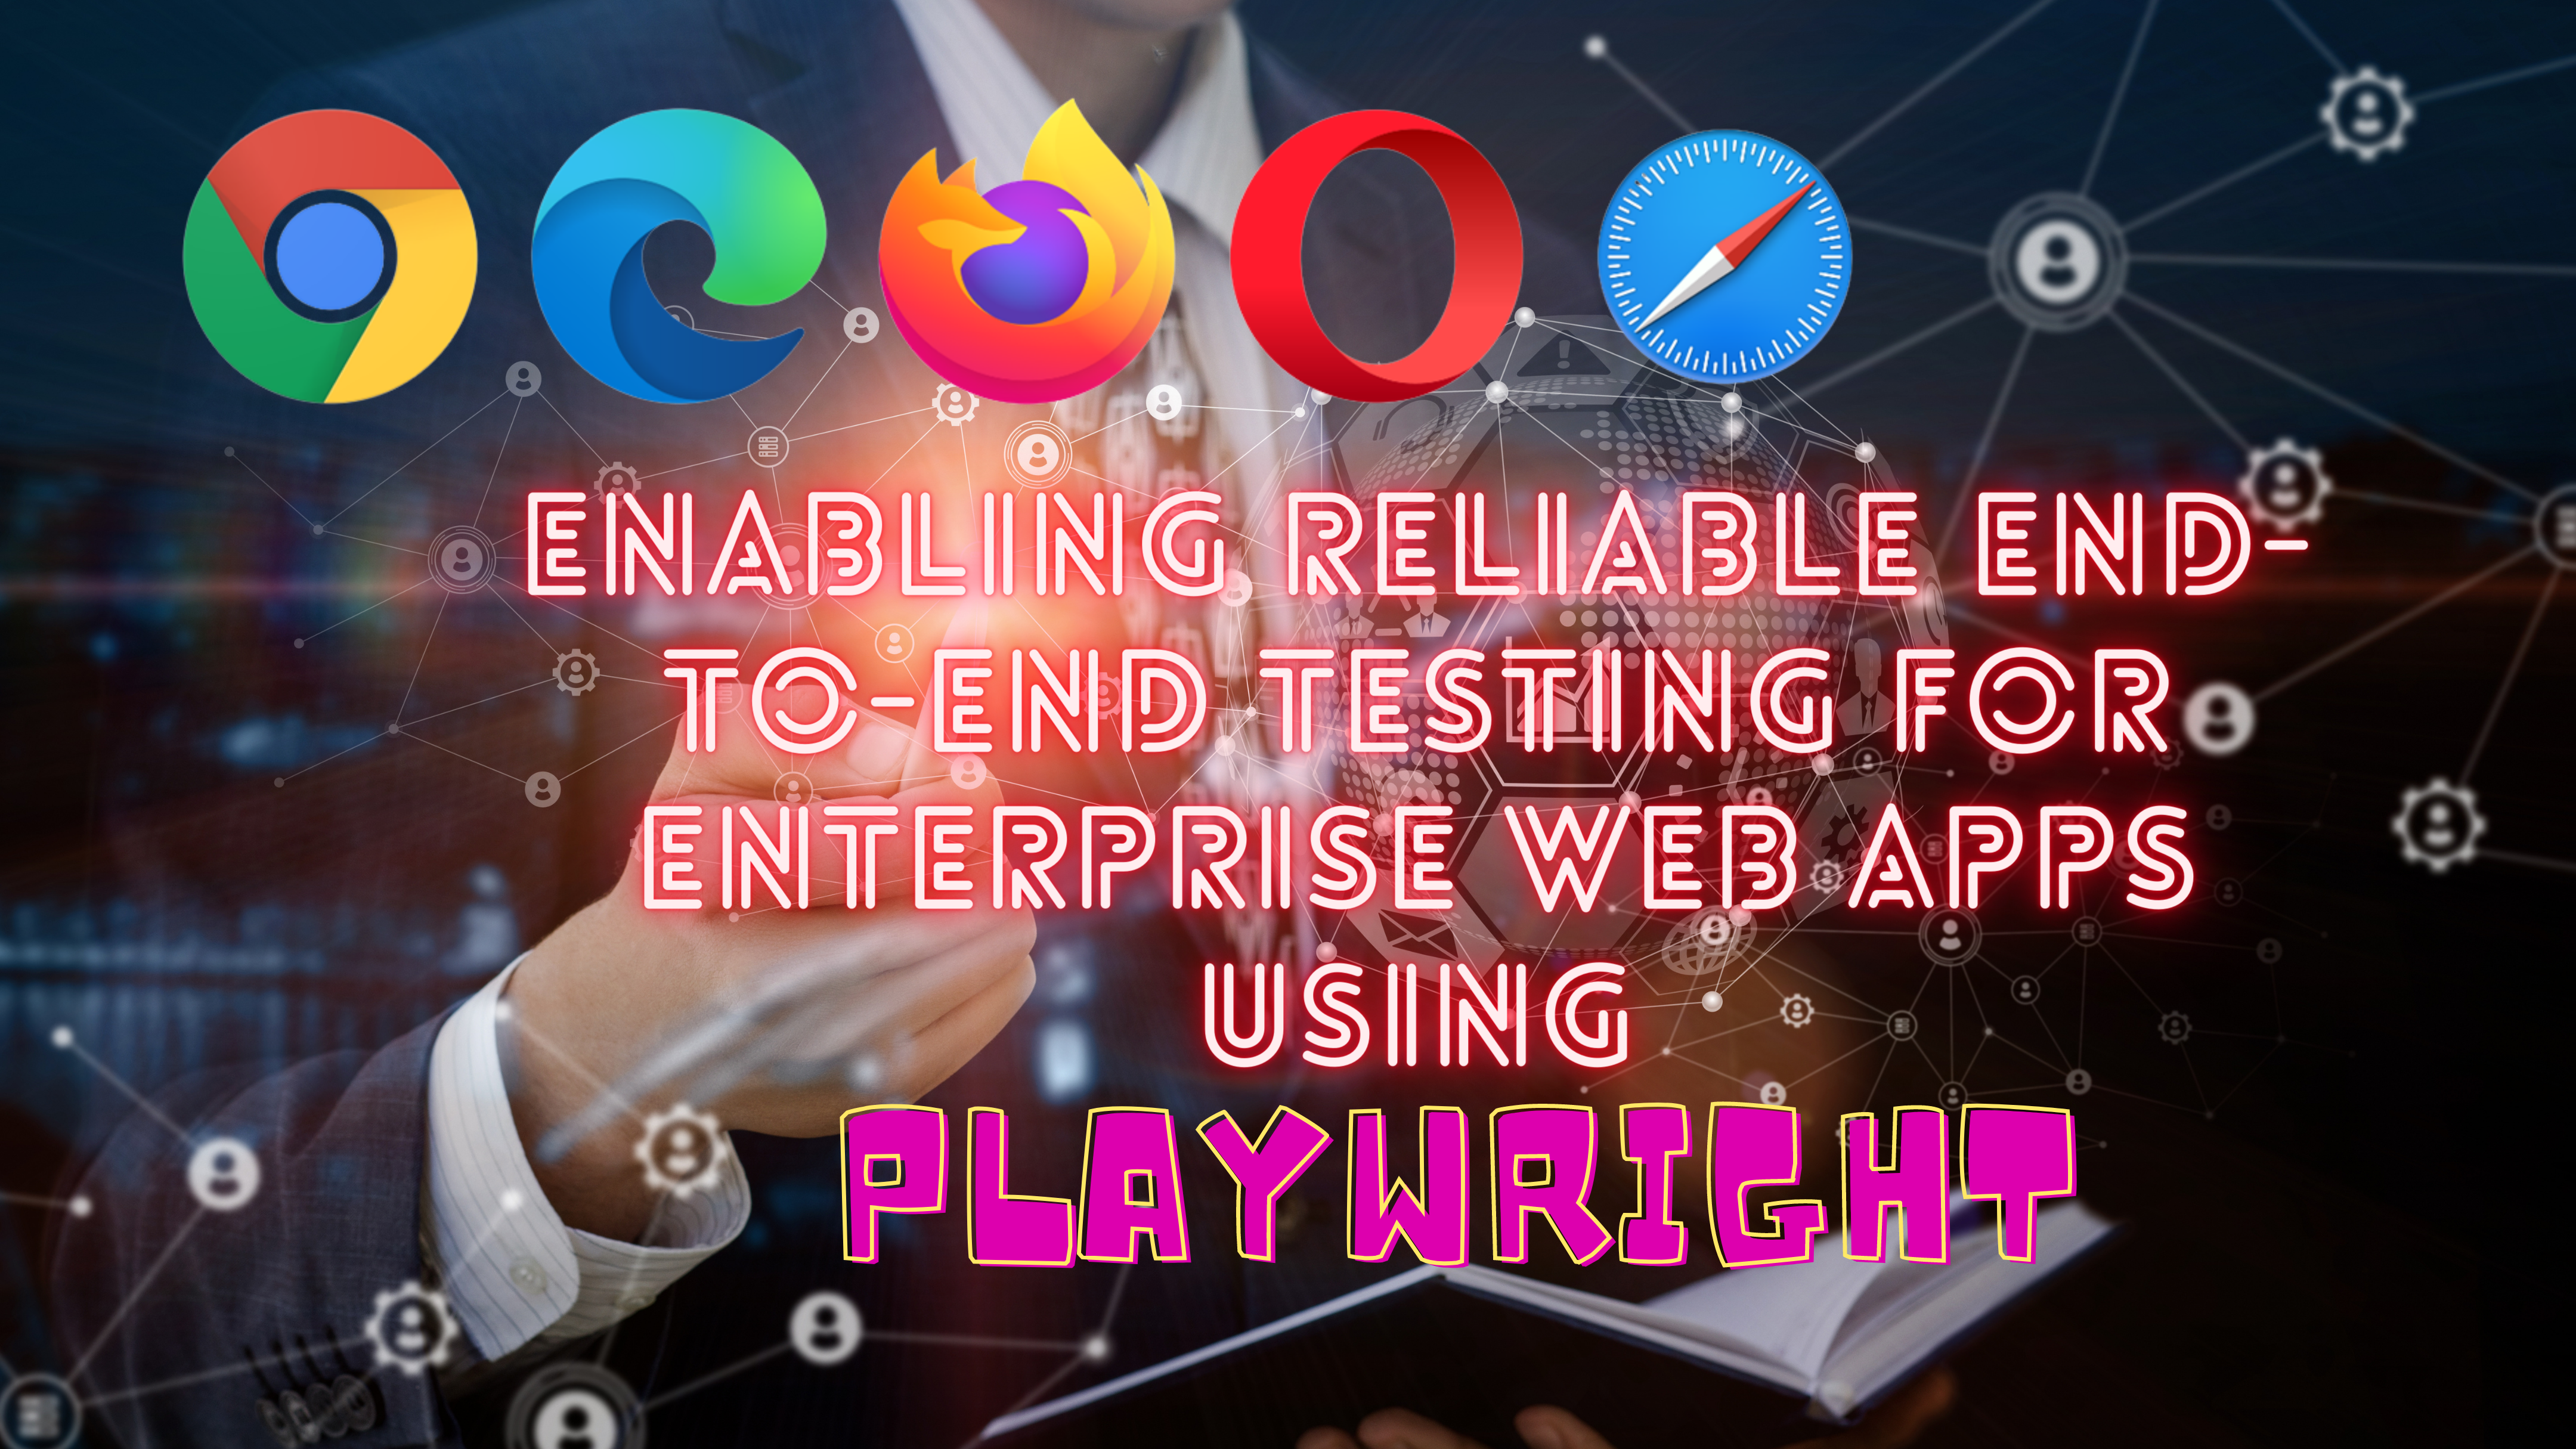 Enabling reliable end-to-end testing for enterprise Web Apps using Playwright